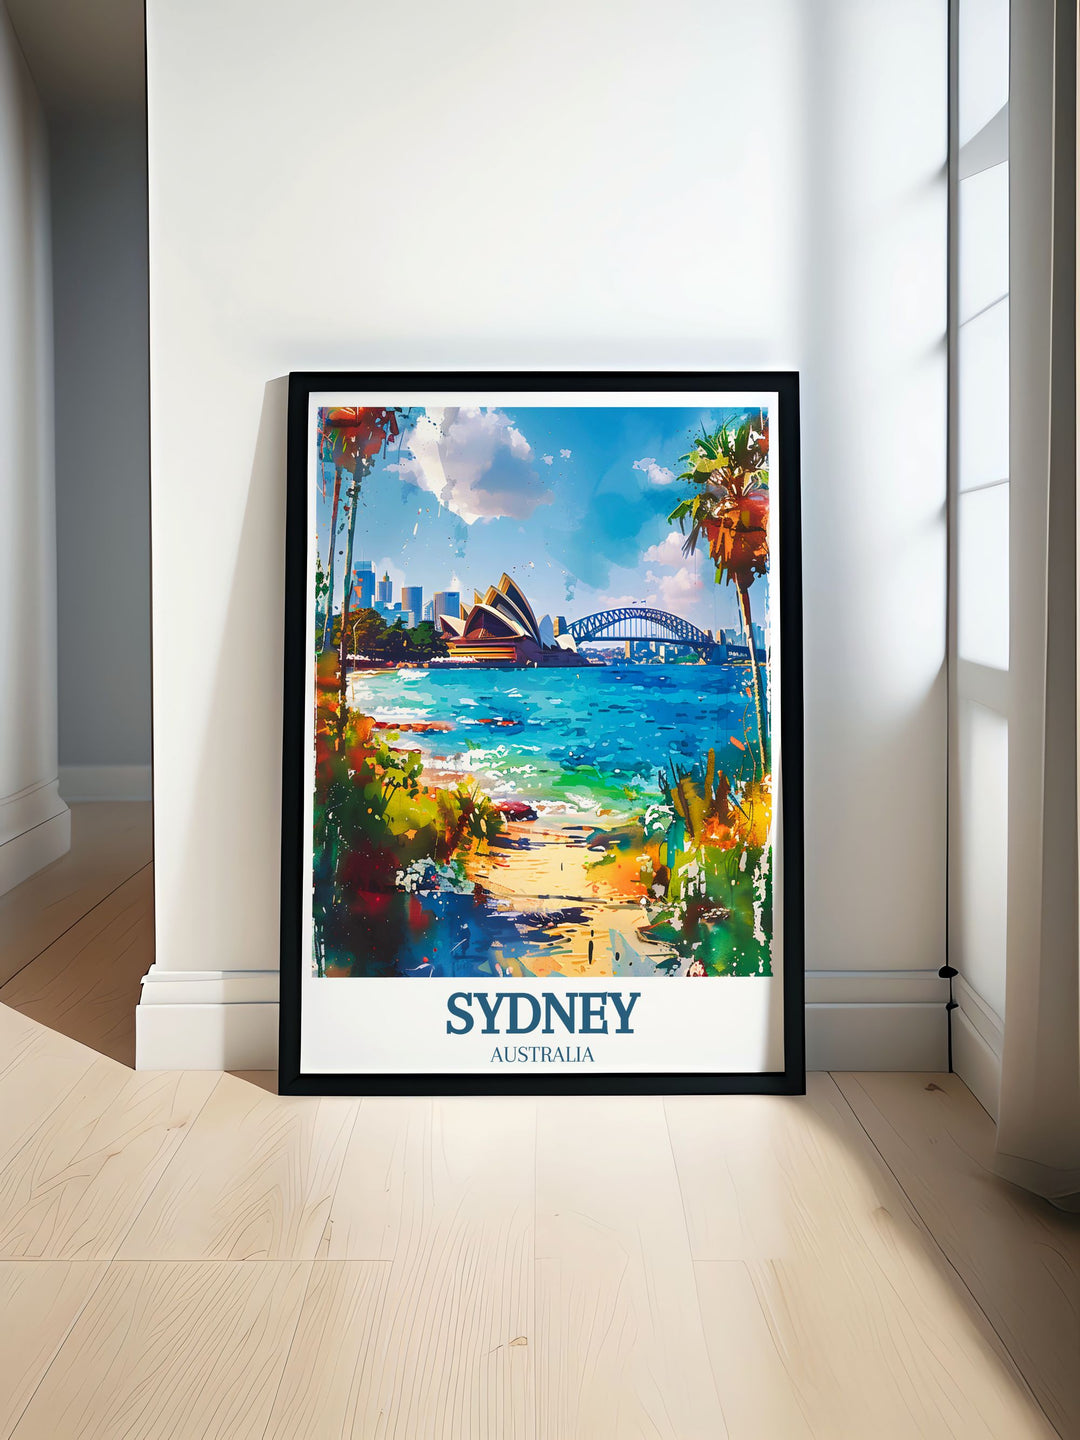 Vintage travel poster showcasing the iconic Sydney Opera House and Sydney Harbour Bridge in vibrant colors perfect for adding a touch of Australian charm to your home decor or as a thoughtful gift for travel enthusiasts and art lovers alike